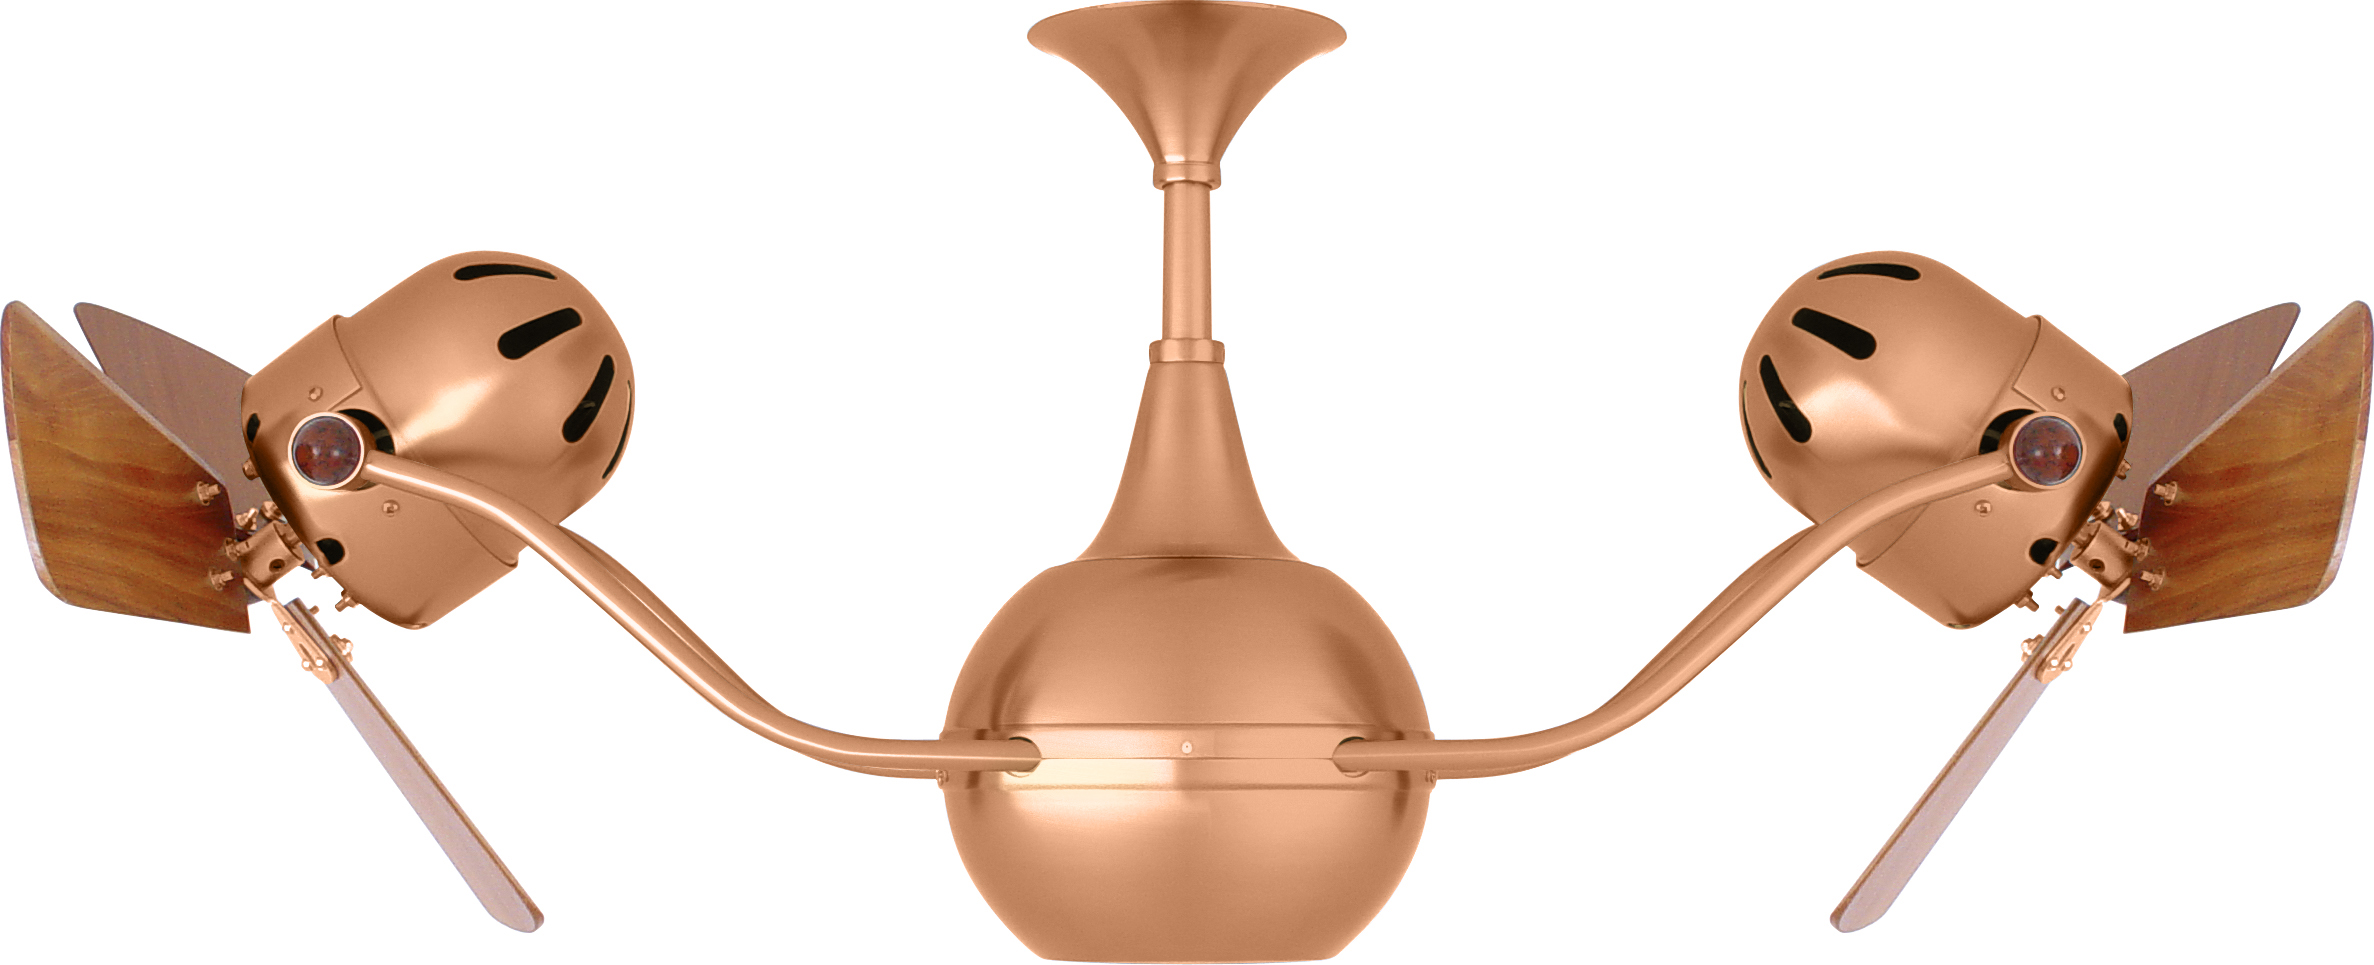 Vent-Bettina rotational dual head ceiling fan in Brushed Copper finish with Solid Mahogany Blades made by Matthews Fan Company.